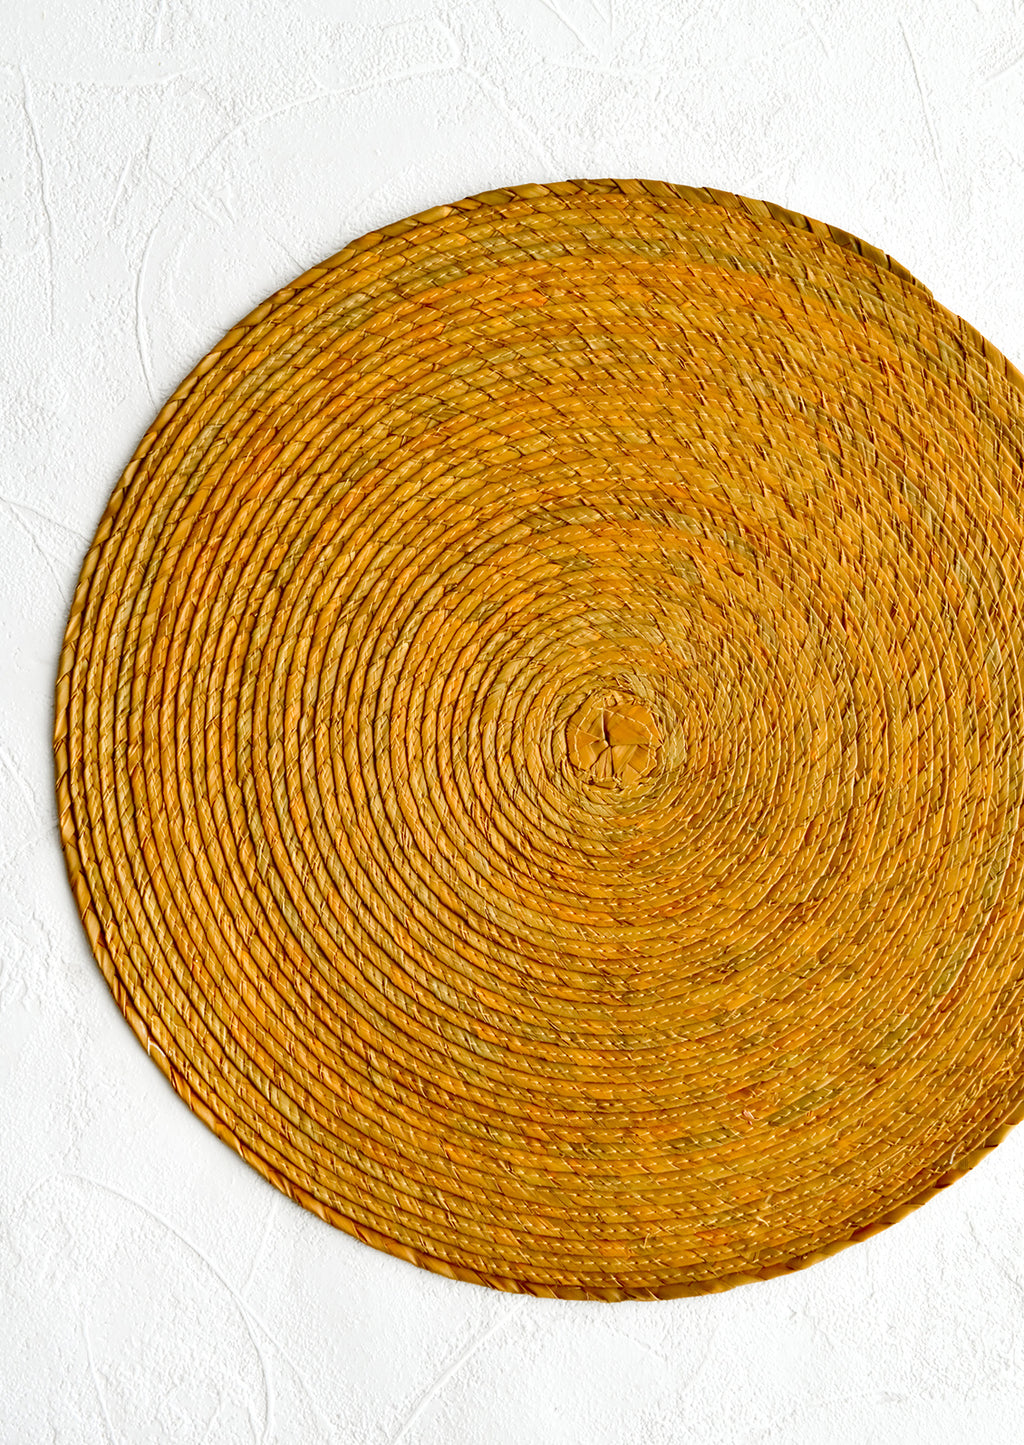 Ochre: A round woven straw placemat in ochre color.